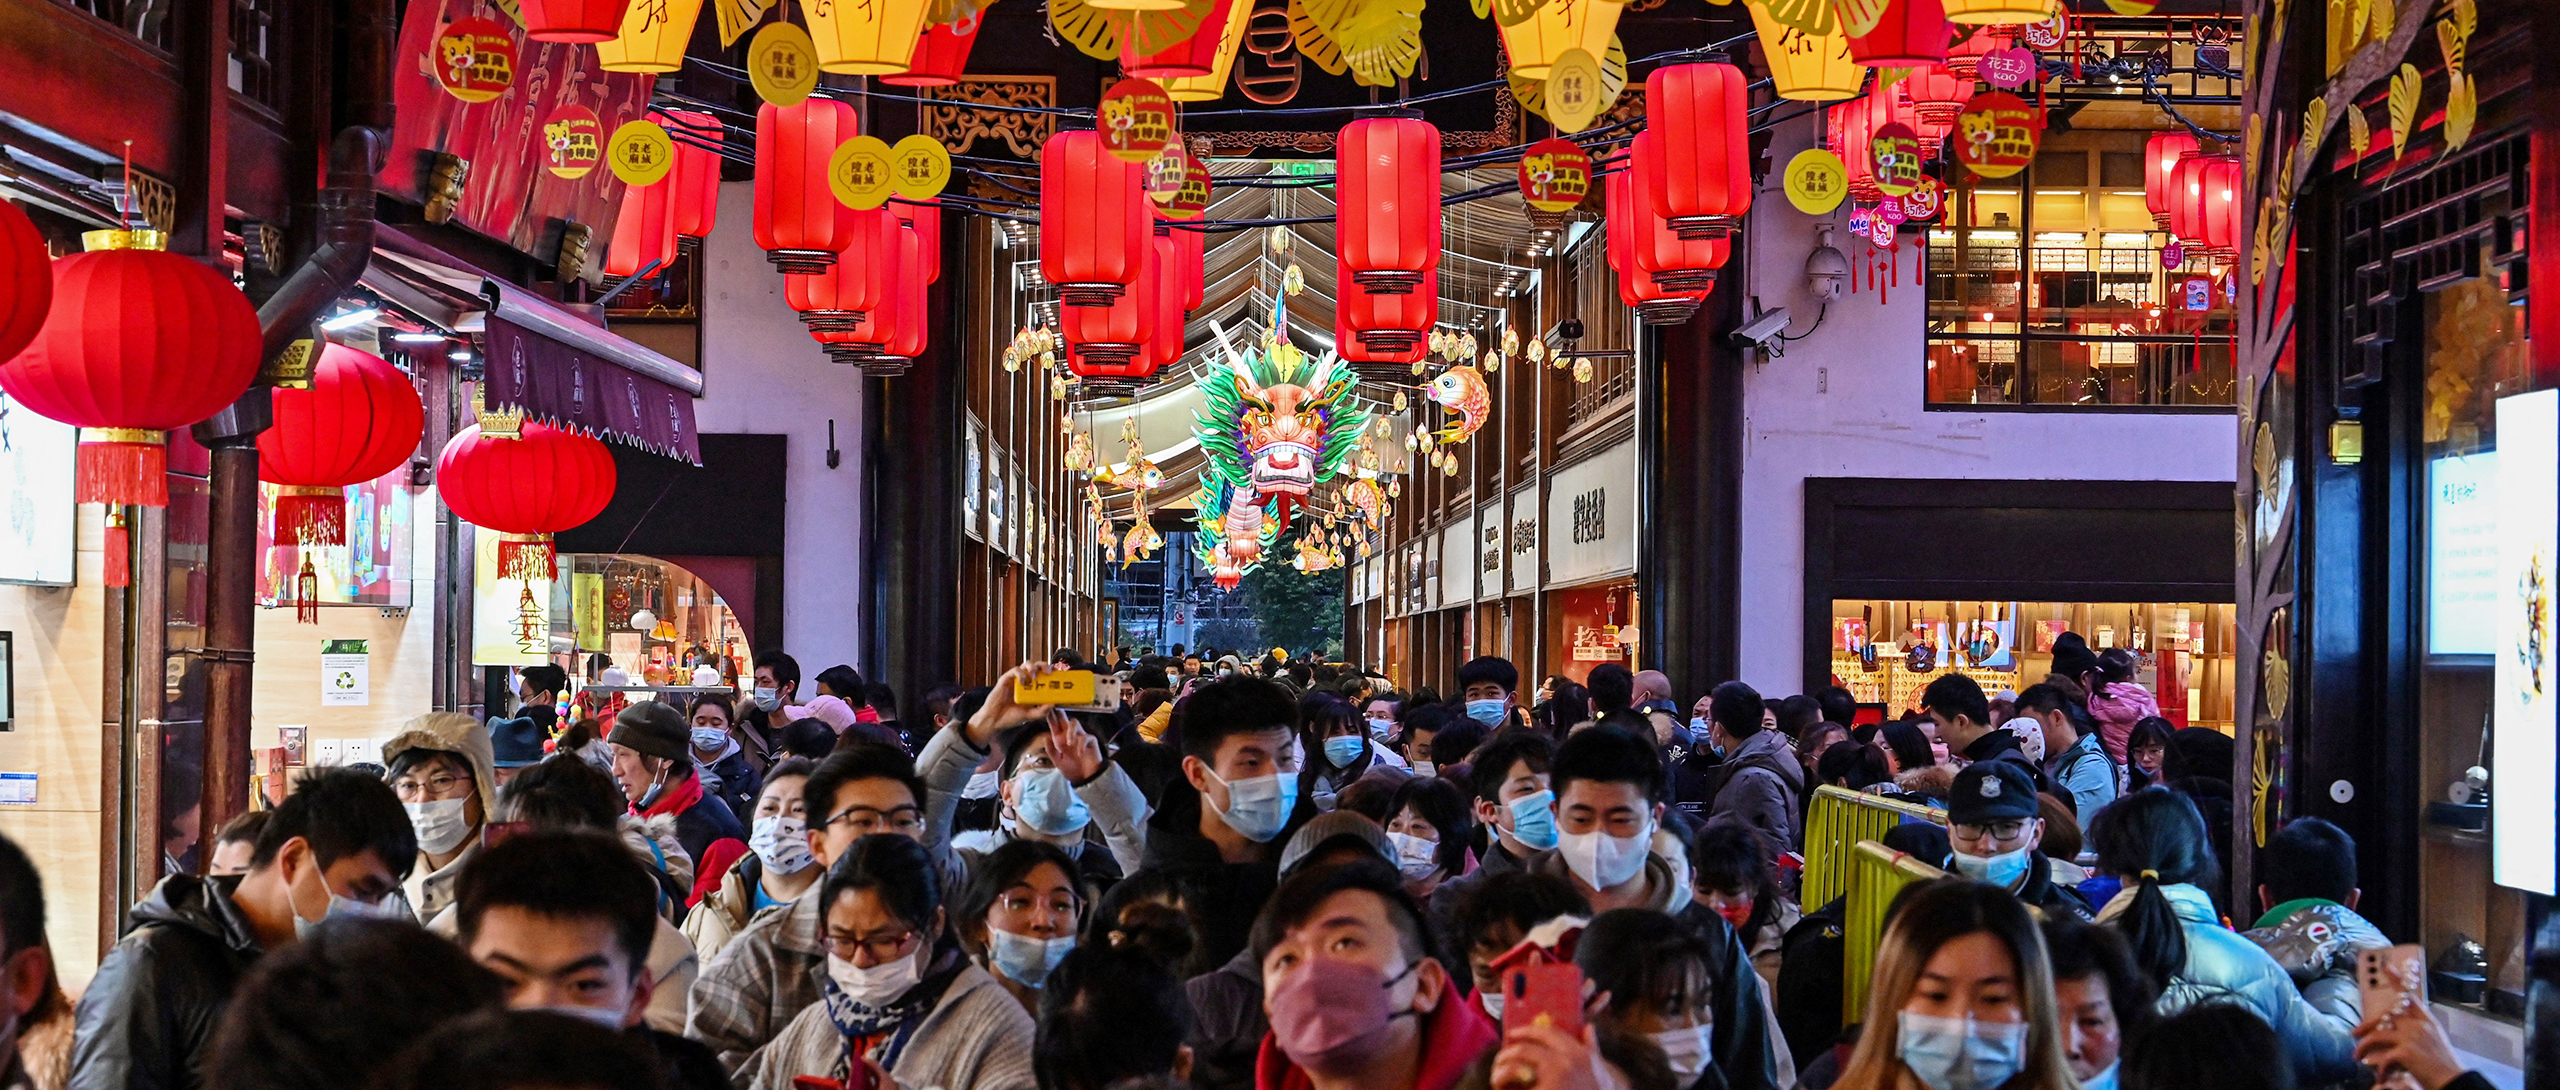 Photo showing people visit the Yu Garden in Shanghai during the celebration of the Lantern Festival marking the end of Lunar New Year celebrations on Feb. 15. (Hector Retamal/AFP via Getty Images)